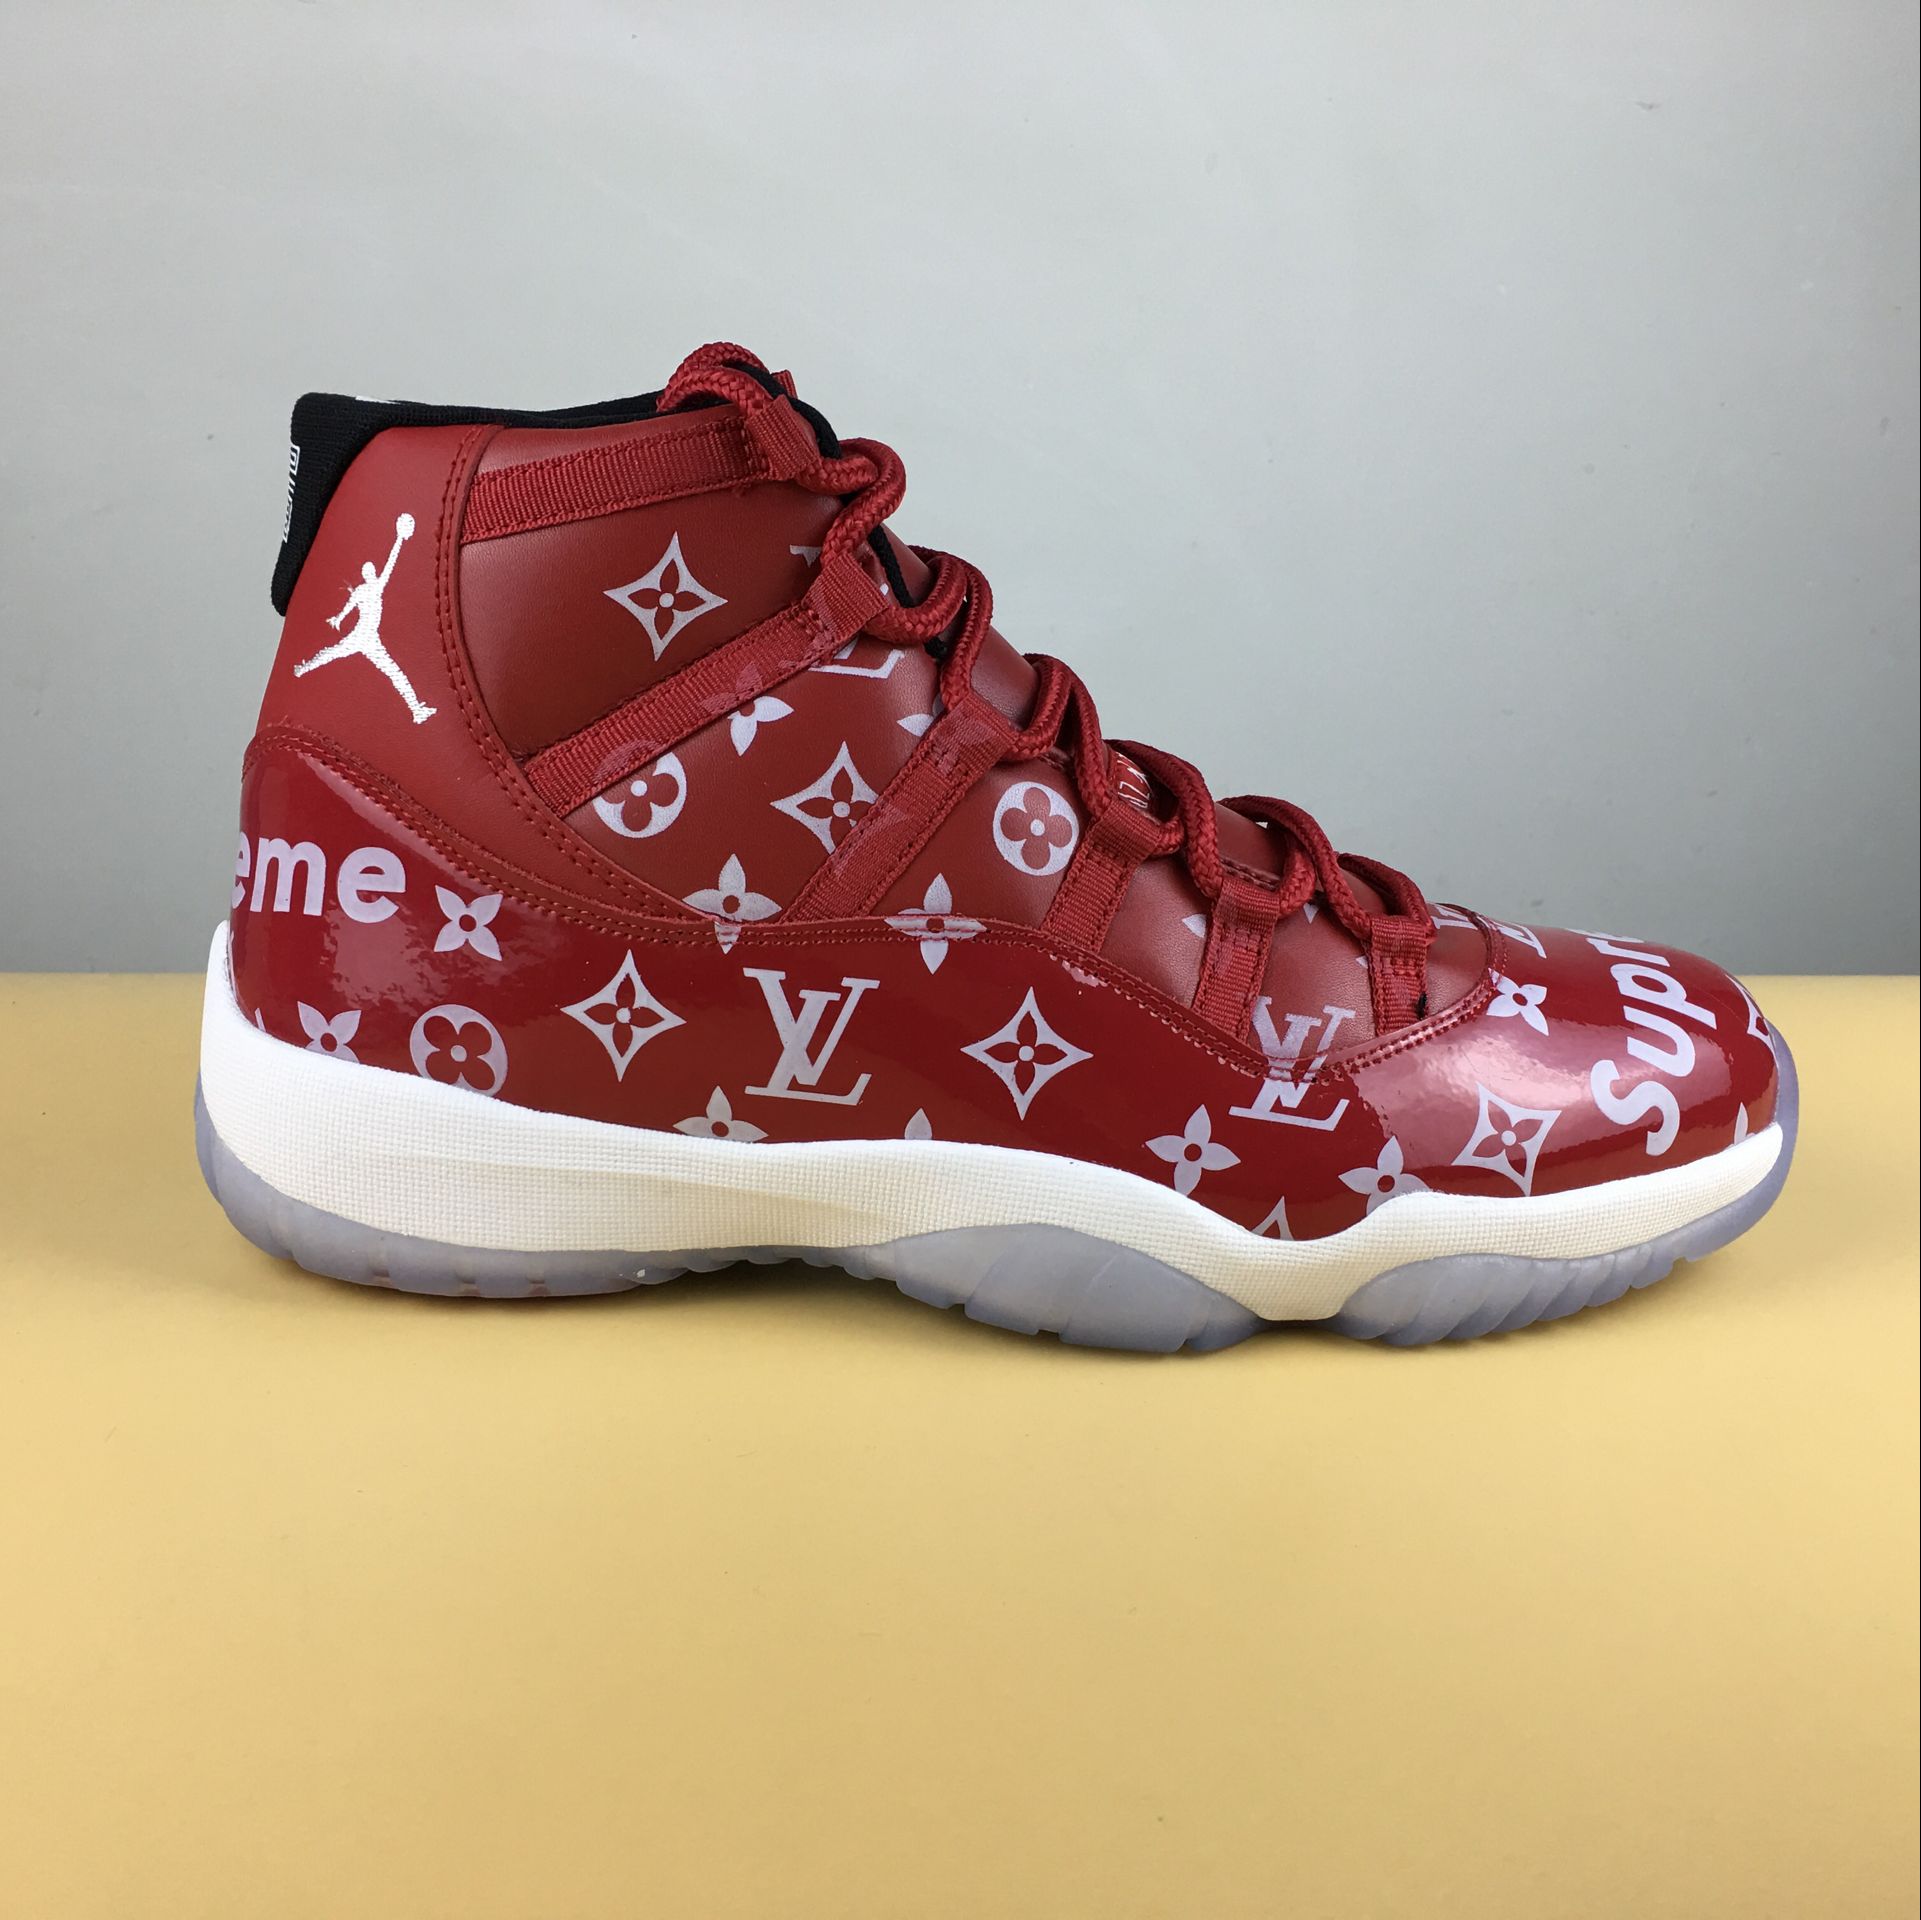 Latest Jordan 11 Sup Hot Red White Shoes